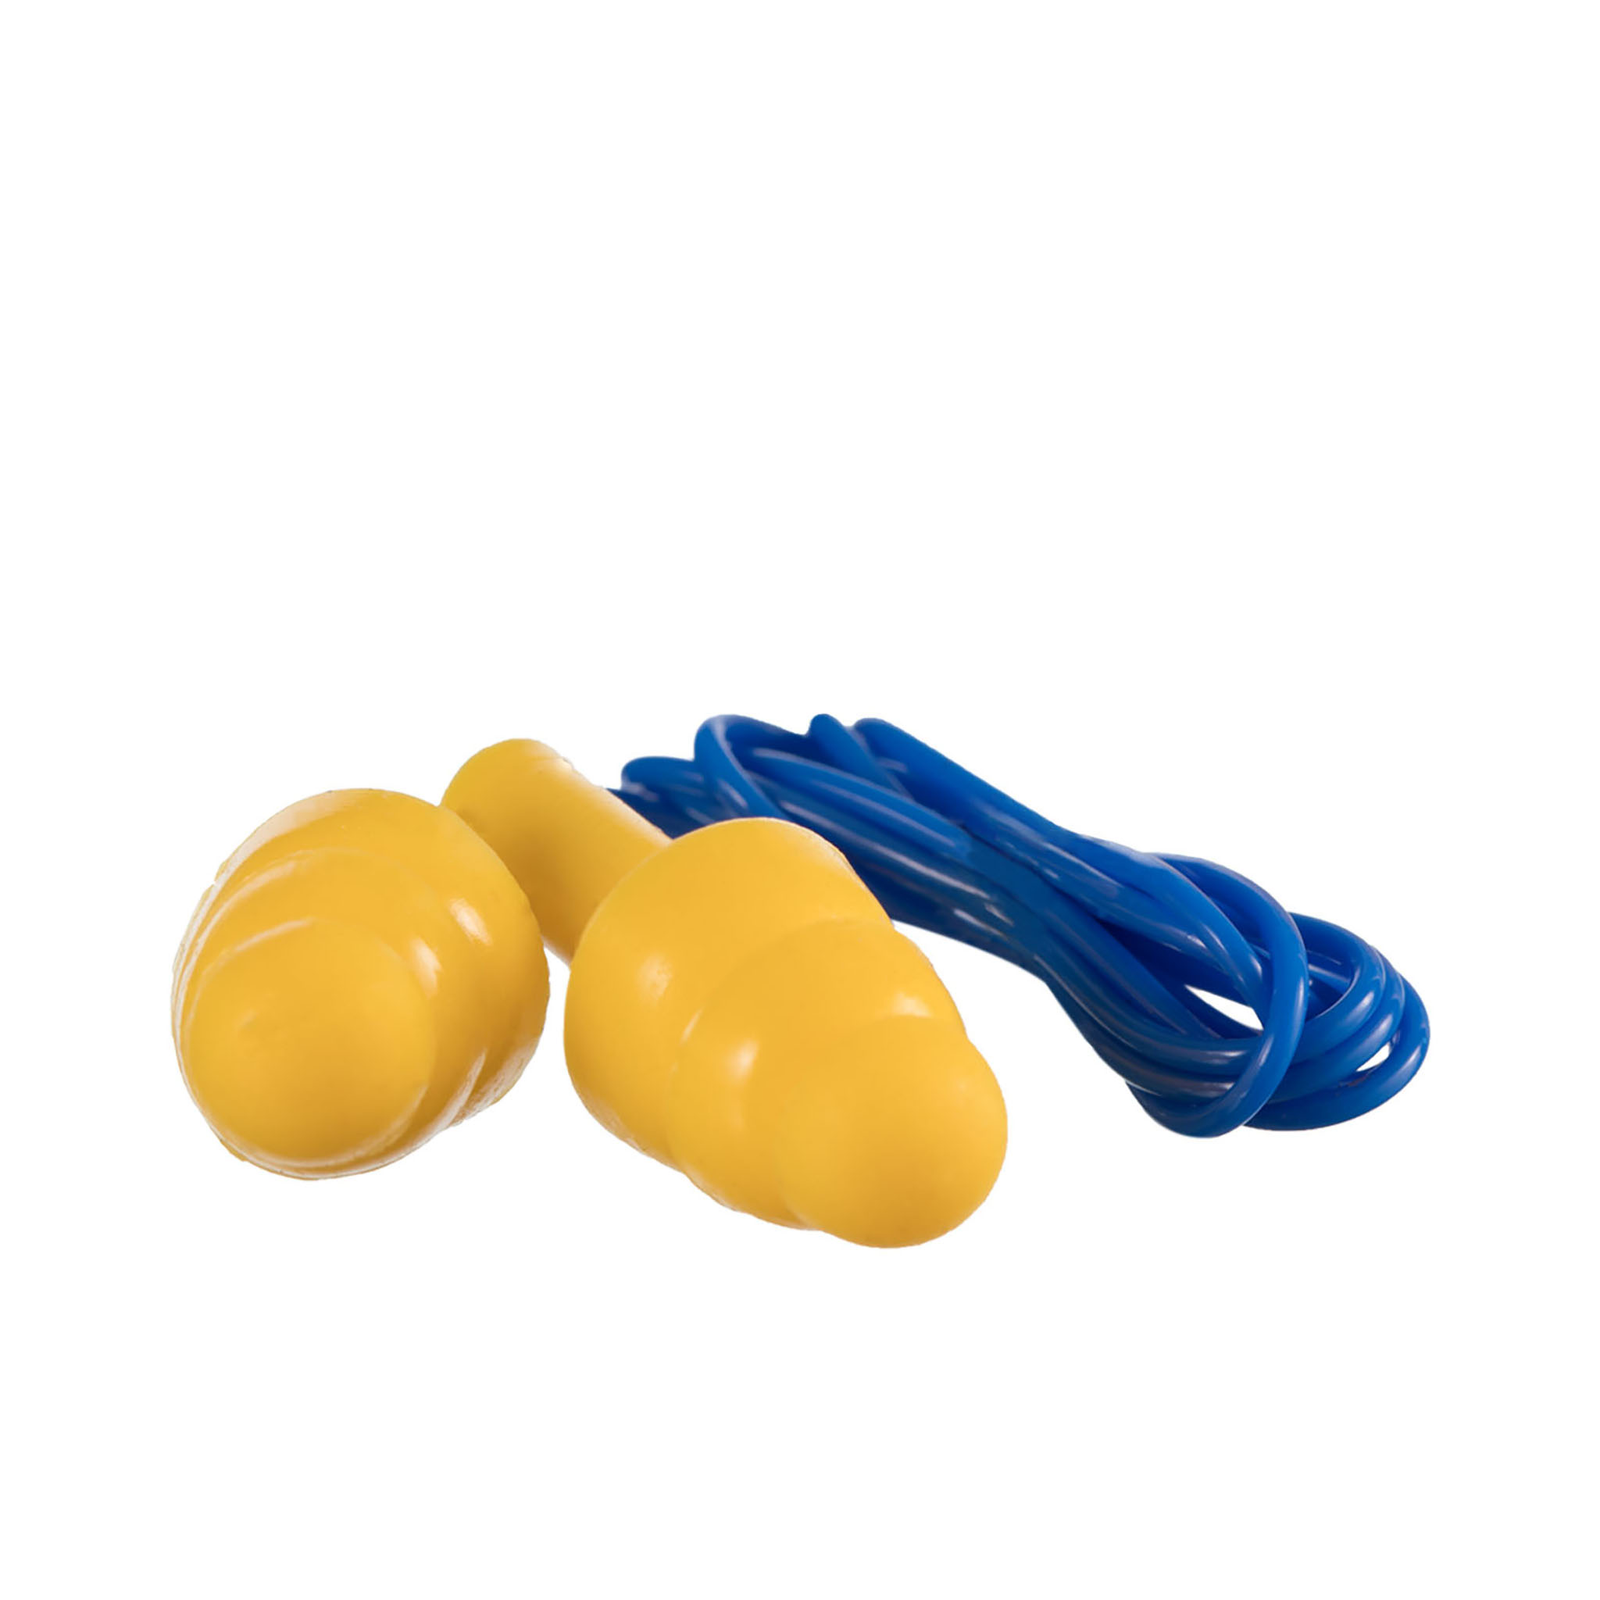 one set of silicone tri flange corded JORESTECH® yellow and blue earplugs for hearing protection